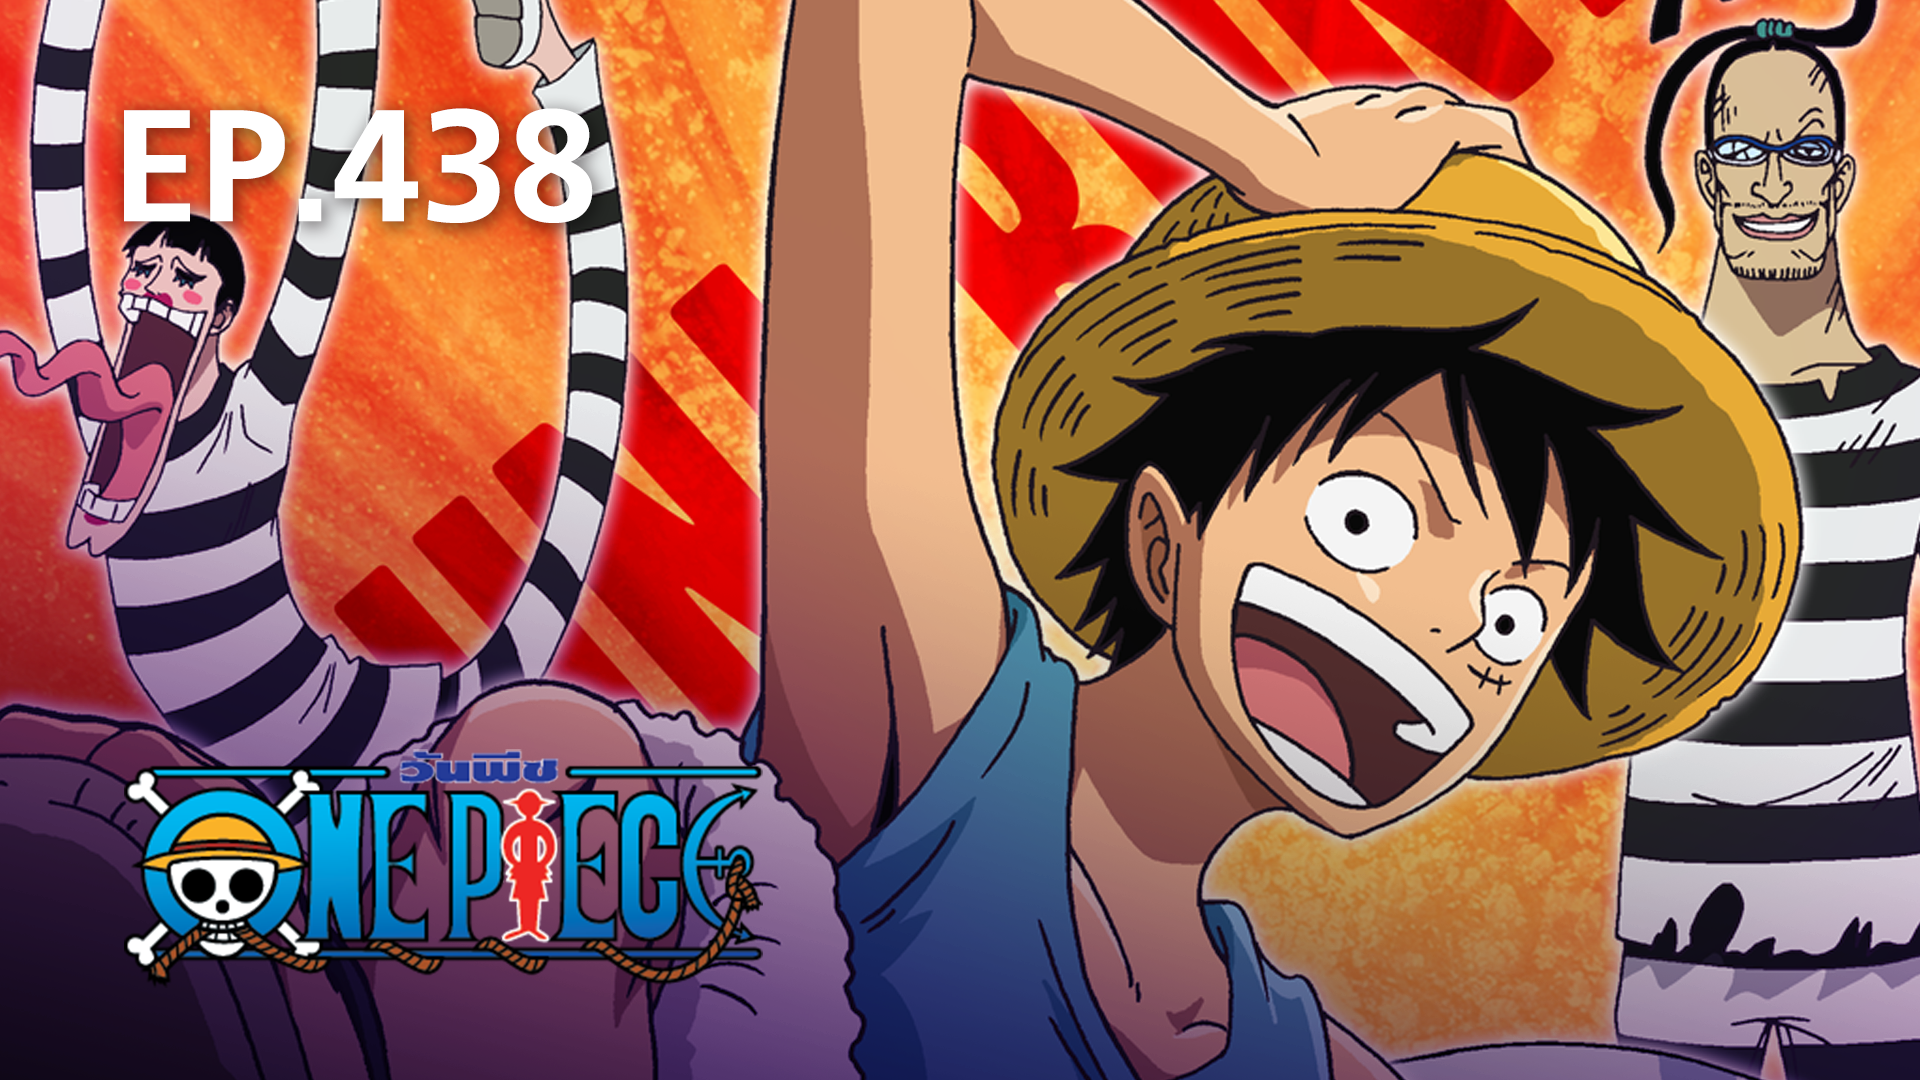 what happend at episode 438 one piece｜TikTok Search